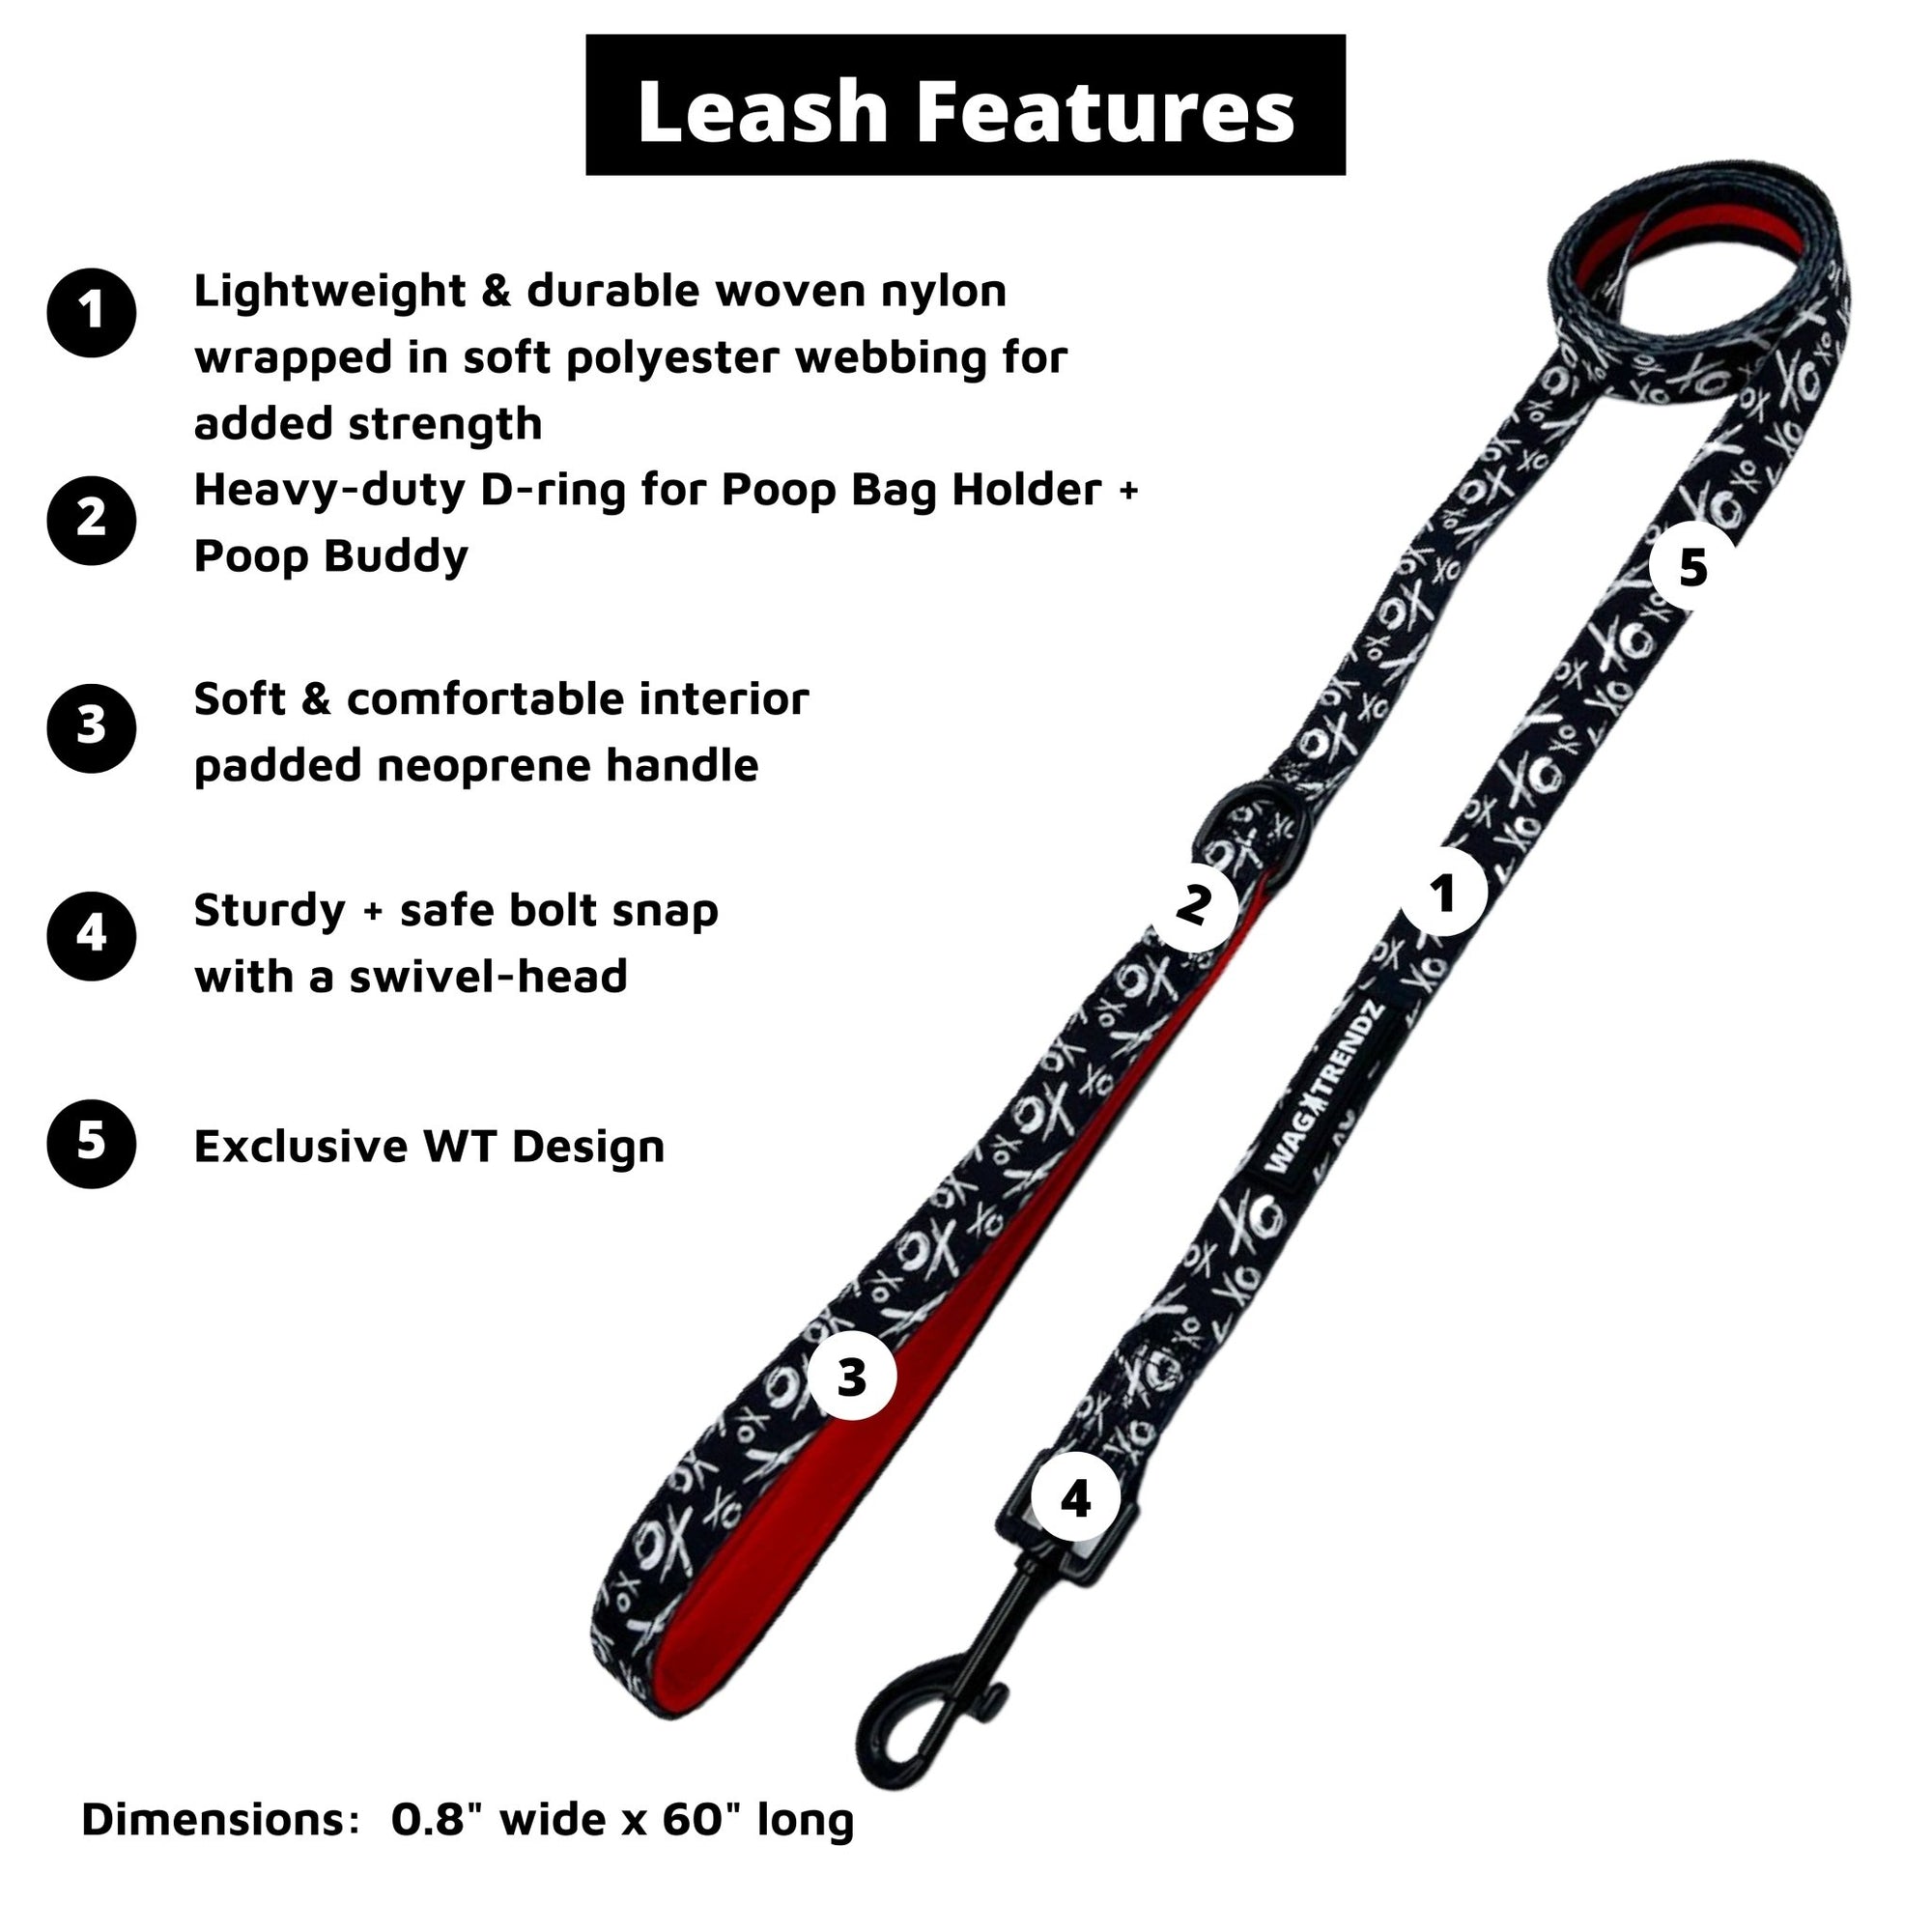 Nylon Dog Leash - black and white XO's with red accents - against a solid white background - product feature captions - Wag Trendz